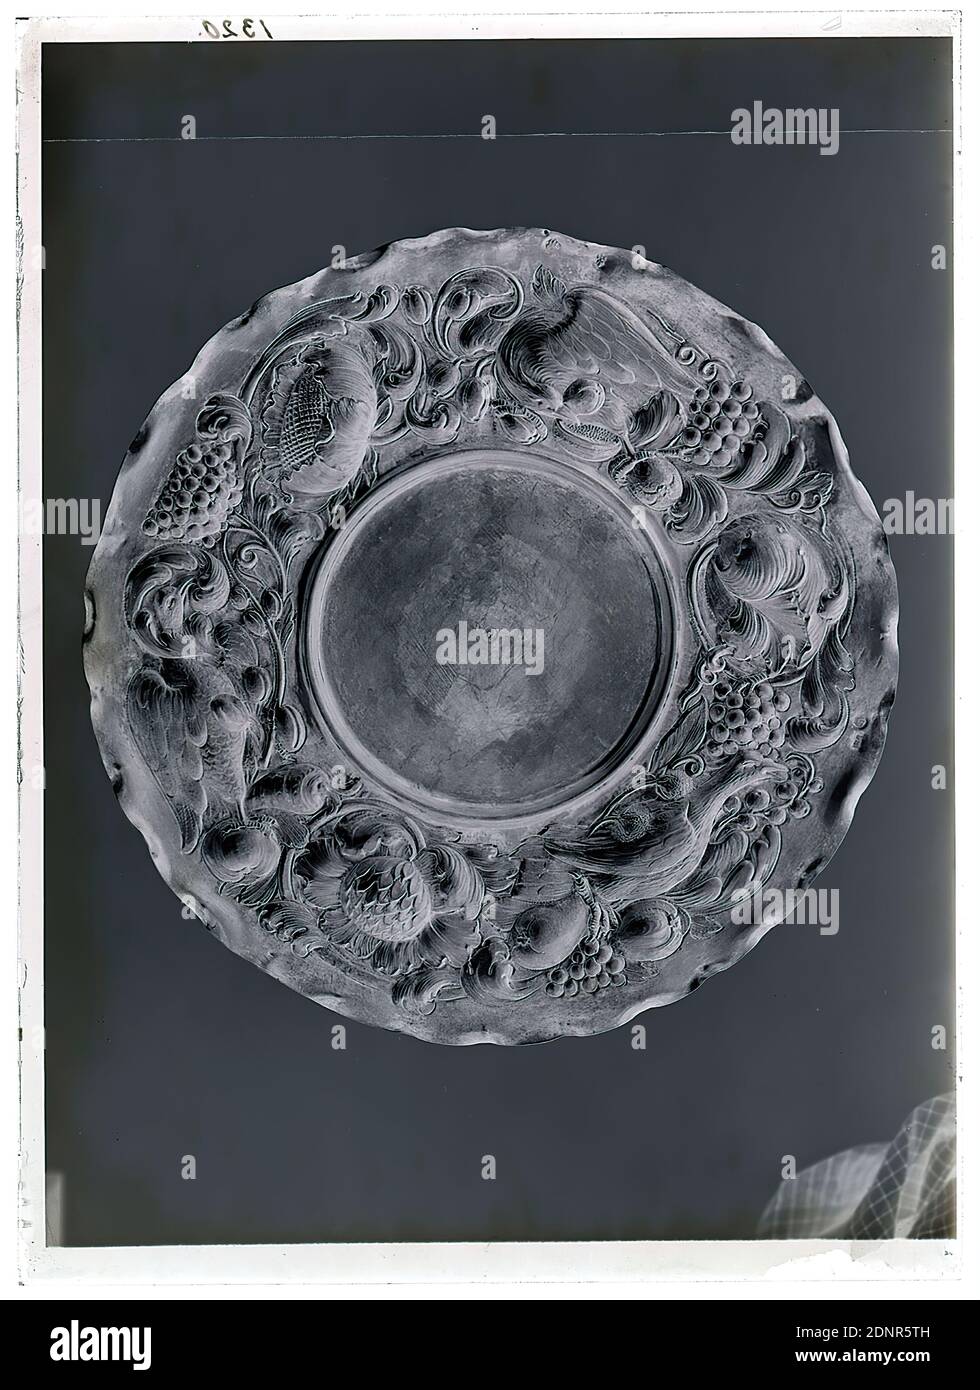 Wilhelm Weimar, credence plate, glass negative, black and white negative process, total: height: 23.8 cm; width: 17.8 cm, numbered: top left : in black ink: 1320, photography, work of applied art (metals), tableware, table decoration, floral ornaments, birds, animals as ornaments, grapes, handicrafts, arts and crafts, industrial design Stock Photo